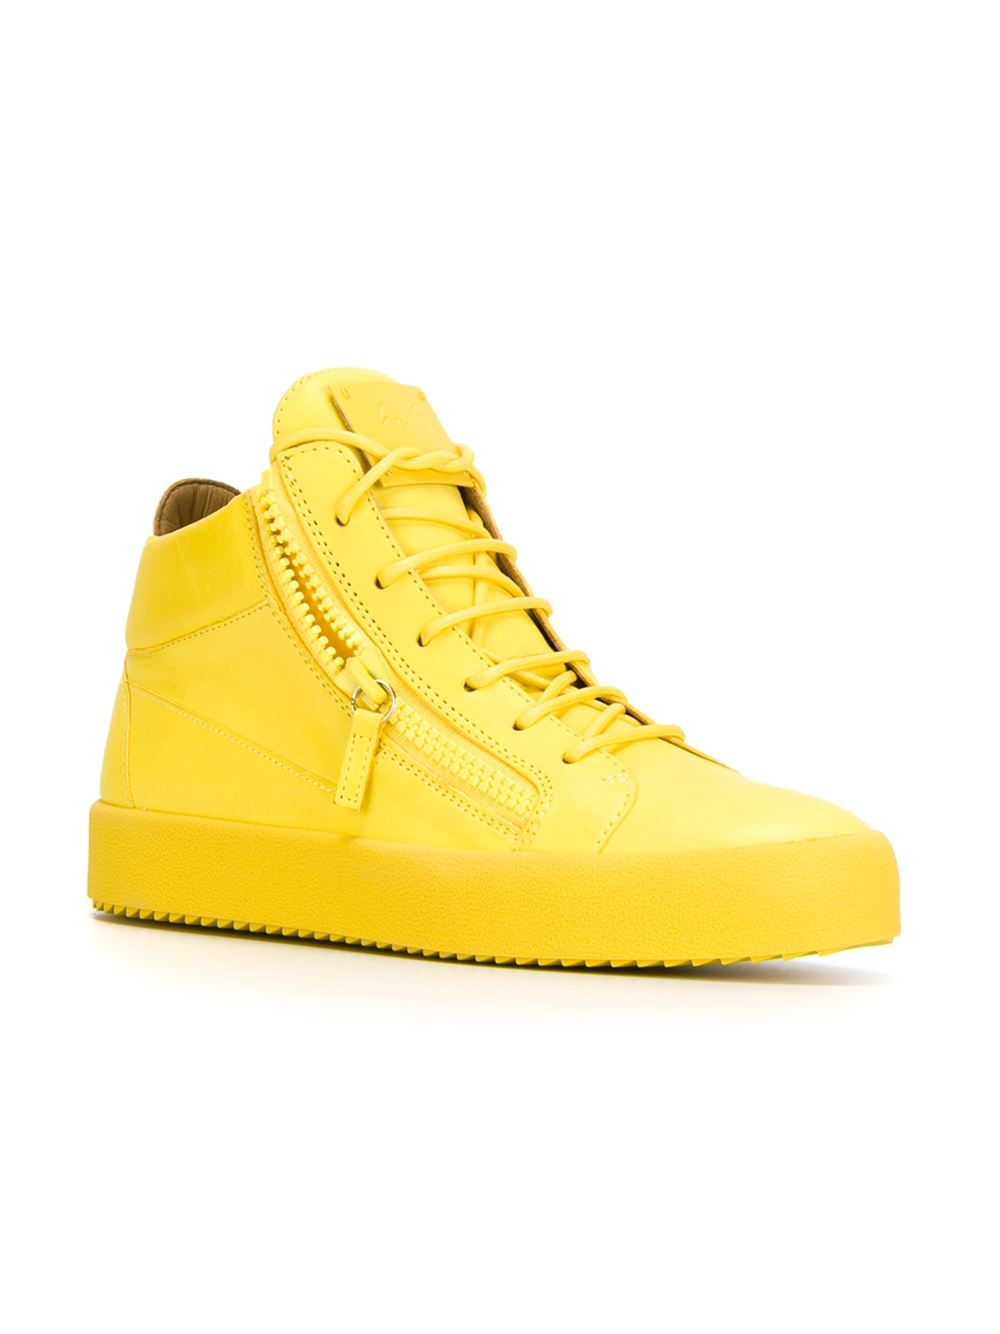 Giuseppe zanotti Zip Leather High-Top Sneakers in Yellow for Men ...